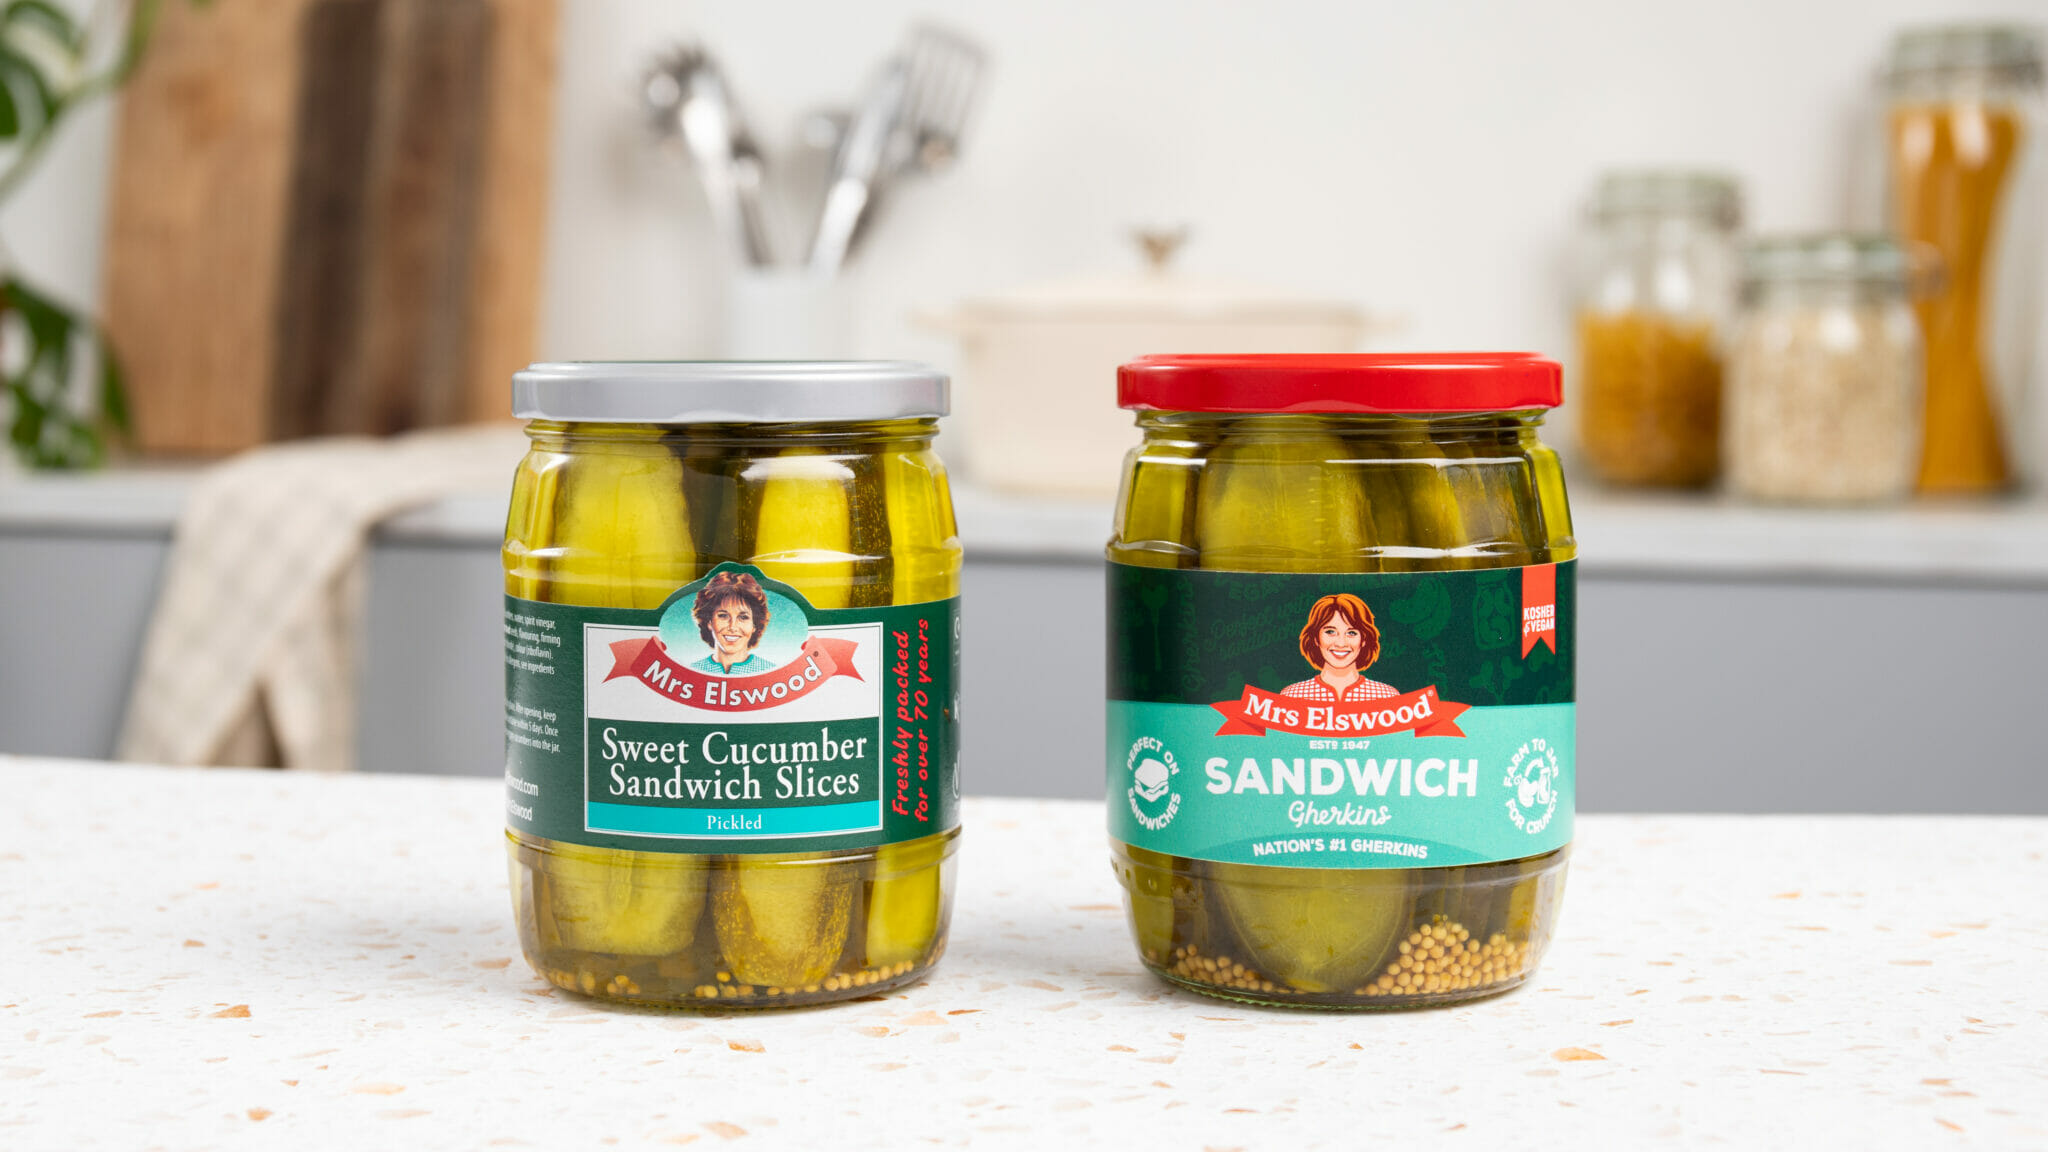 A brand evolution for the nation’s number one gherkin brand – Mrs Elswood